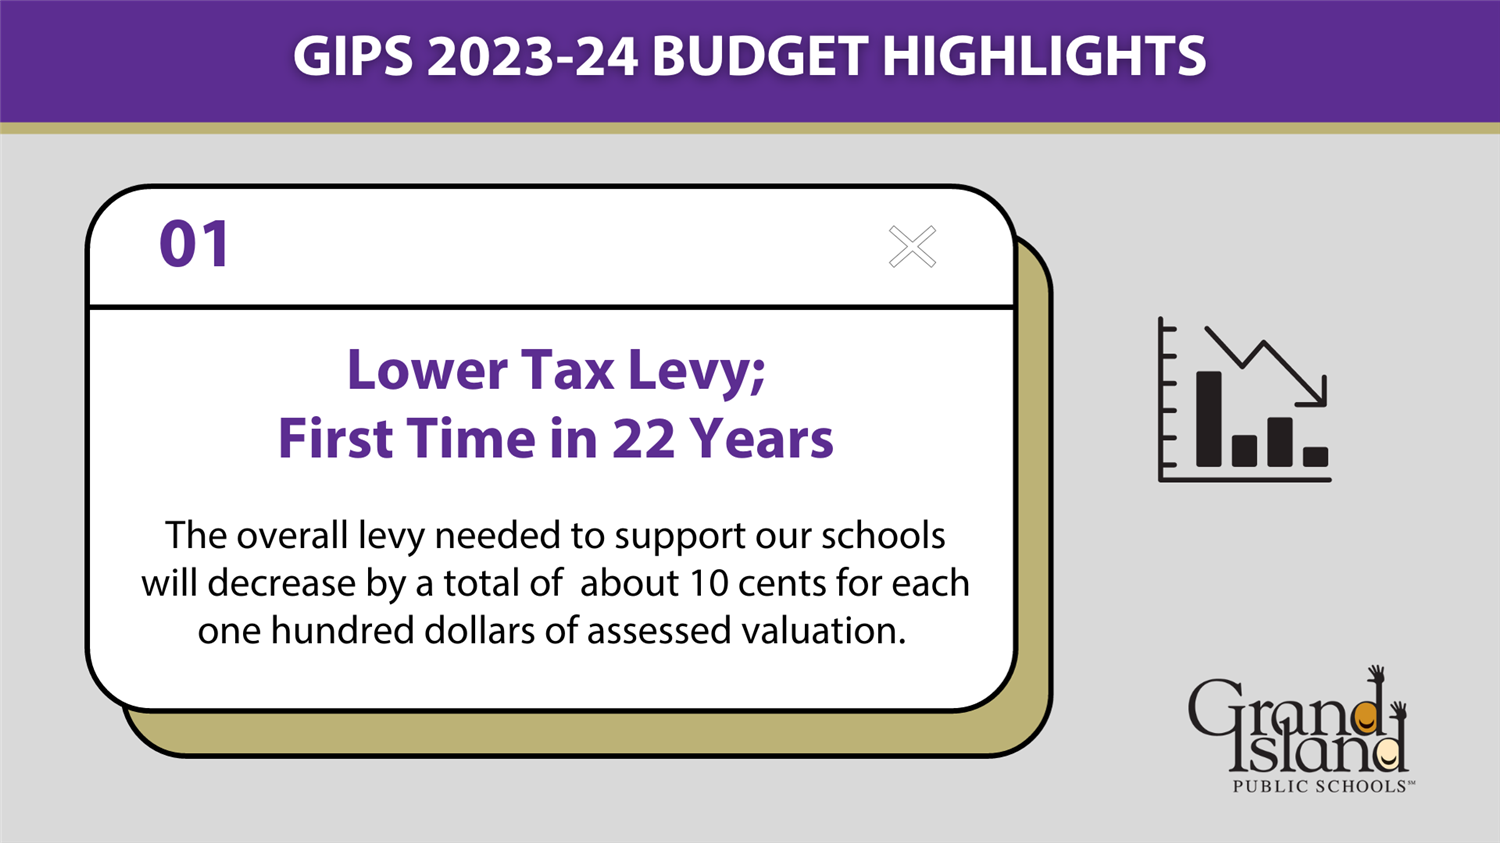 GIPS Budget Highlight 01 - Lower Tax Levy; First Time in 22 Years